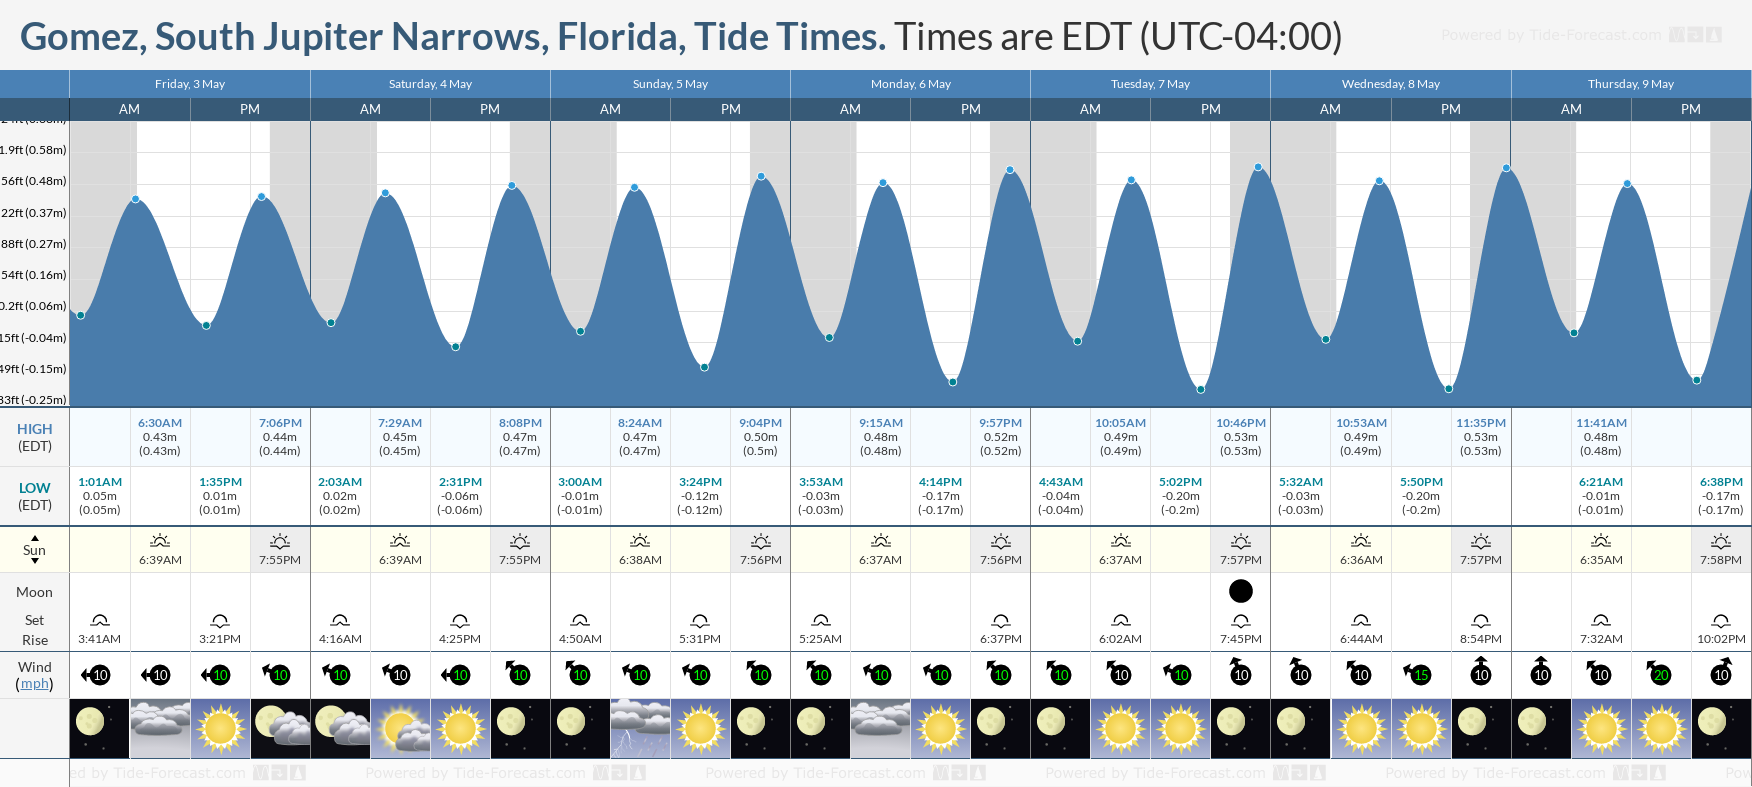 Gomez, South Jupiter Narrows, Florida Tide Chart including high and low tide tide times for the next 7 days